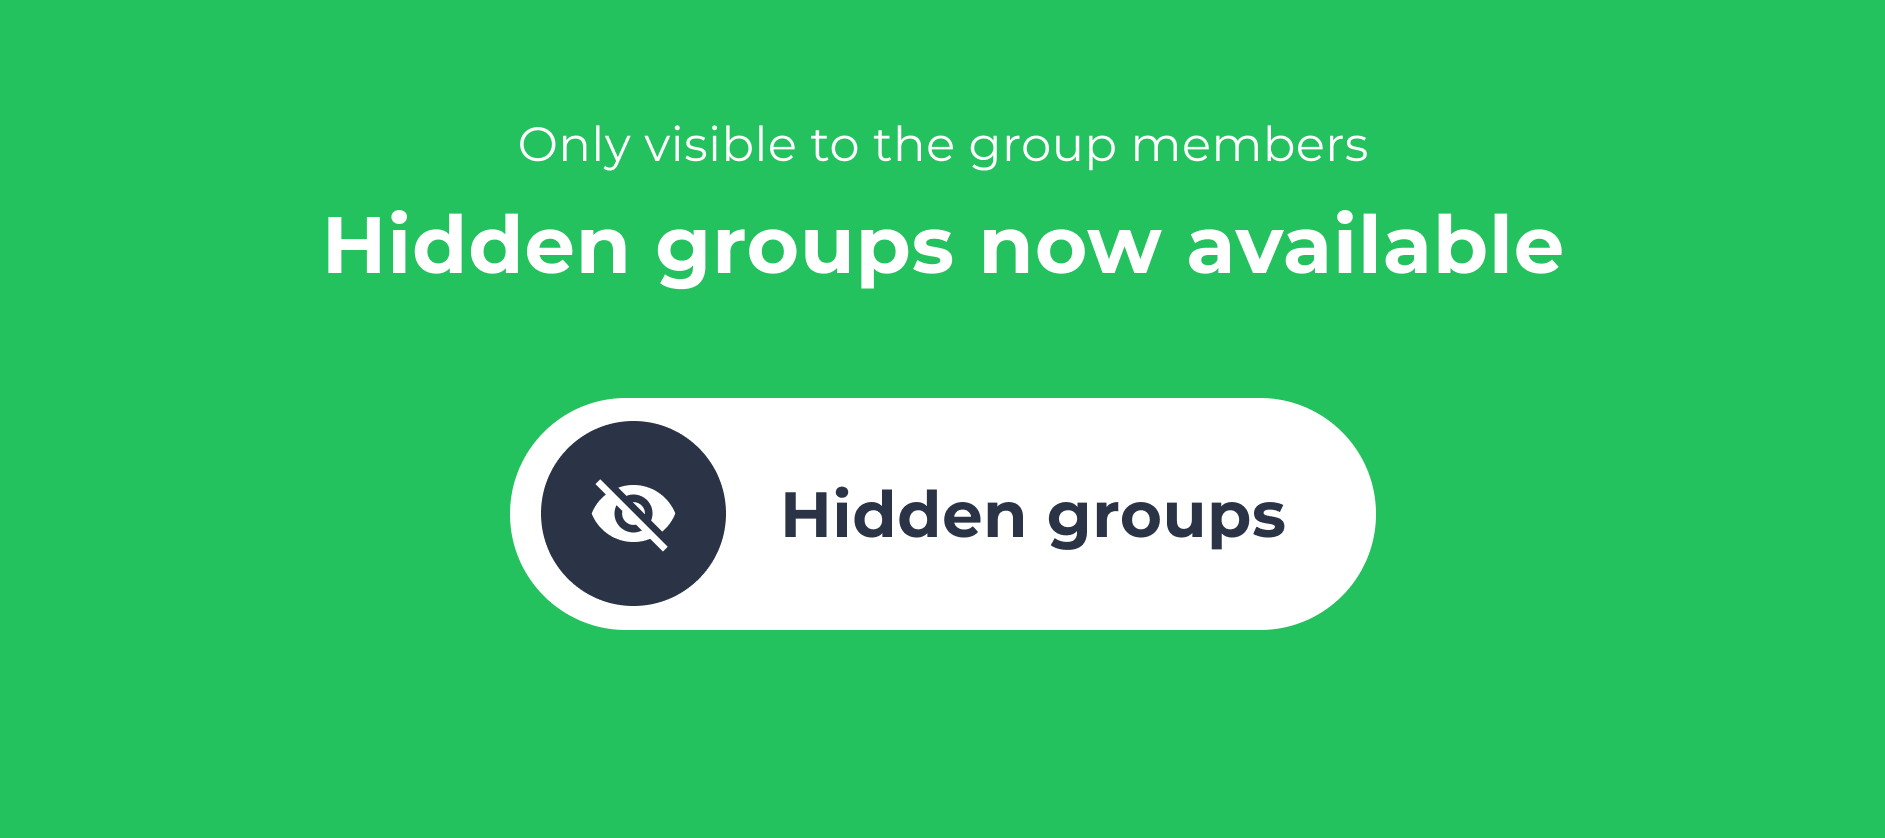 Hidden groups now available